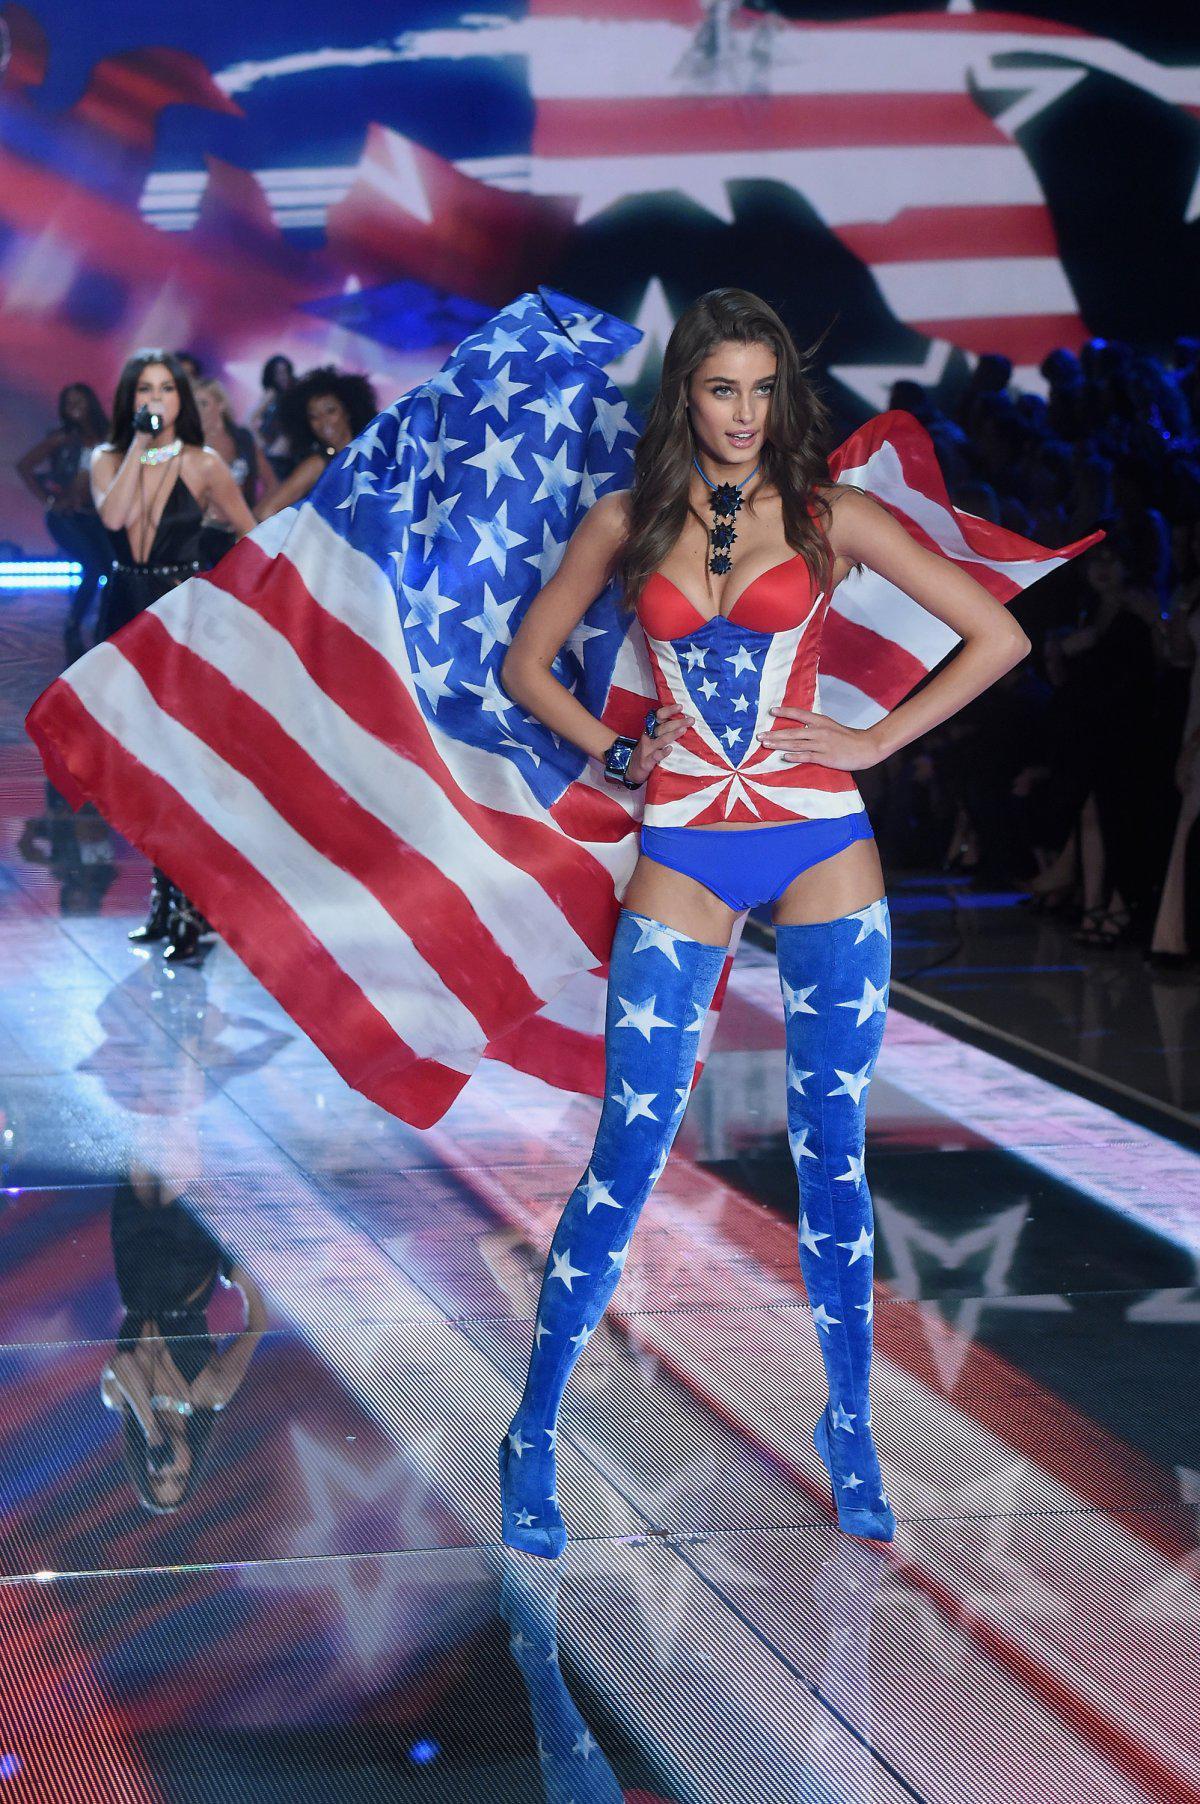 victorias-secret-youngest-model-taylor-hill-shes-just-19-showed-off-her-american-spirit